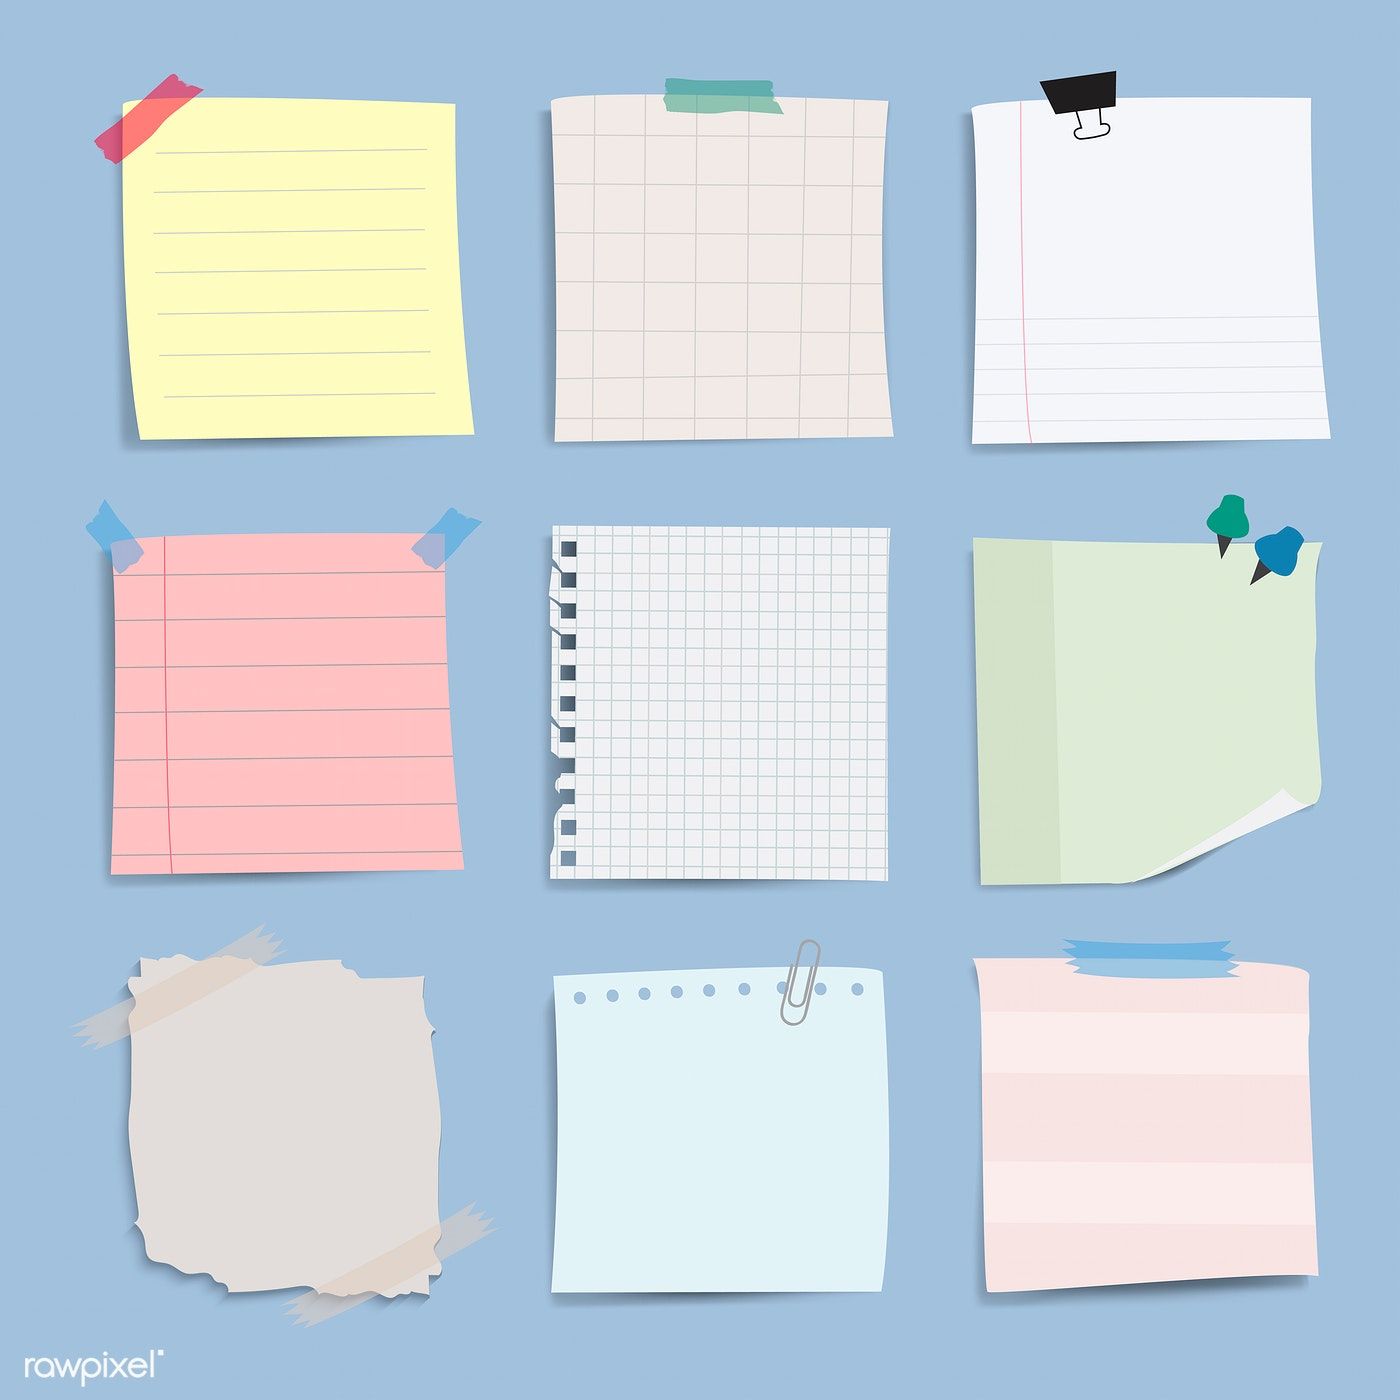 Download premium vector of Collection of sticky note illustrations by Sasi about post it, sticky notes, blue notes, light blue notes, and post it notes 412566. Note paper, Sticky notes, Note doodles